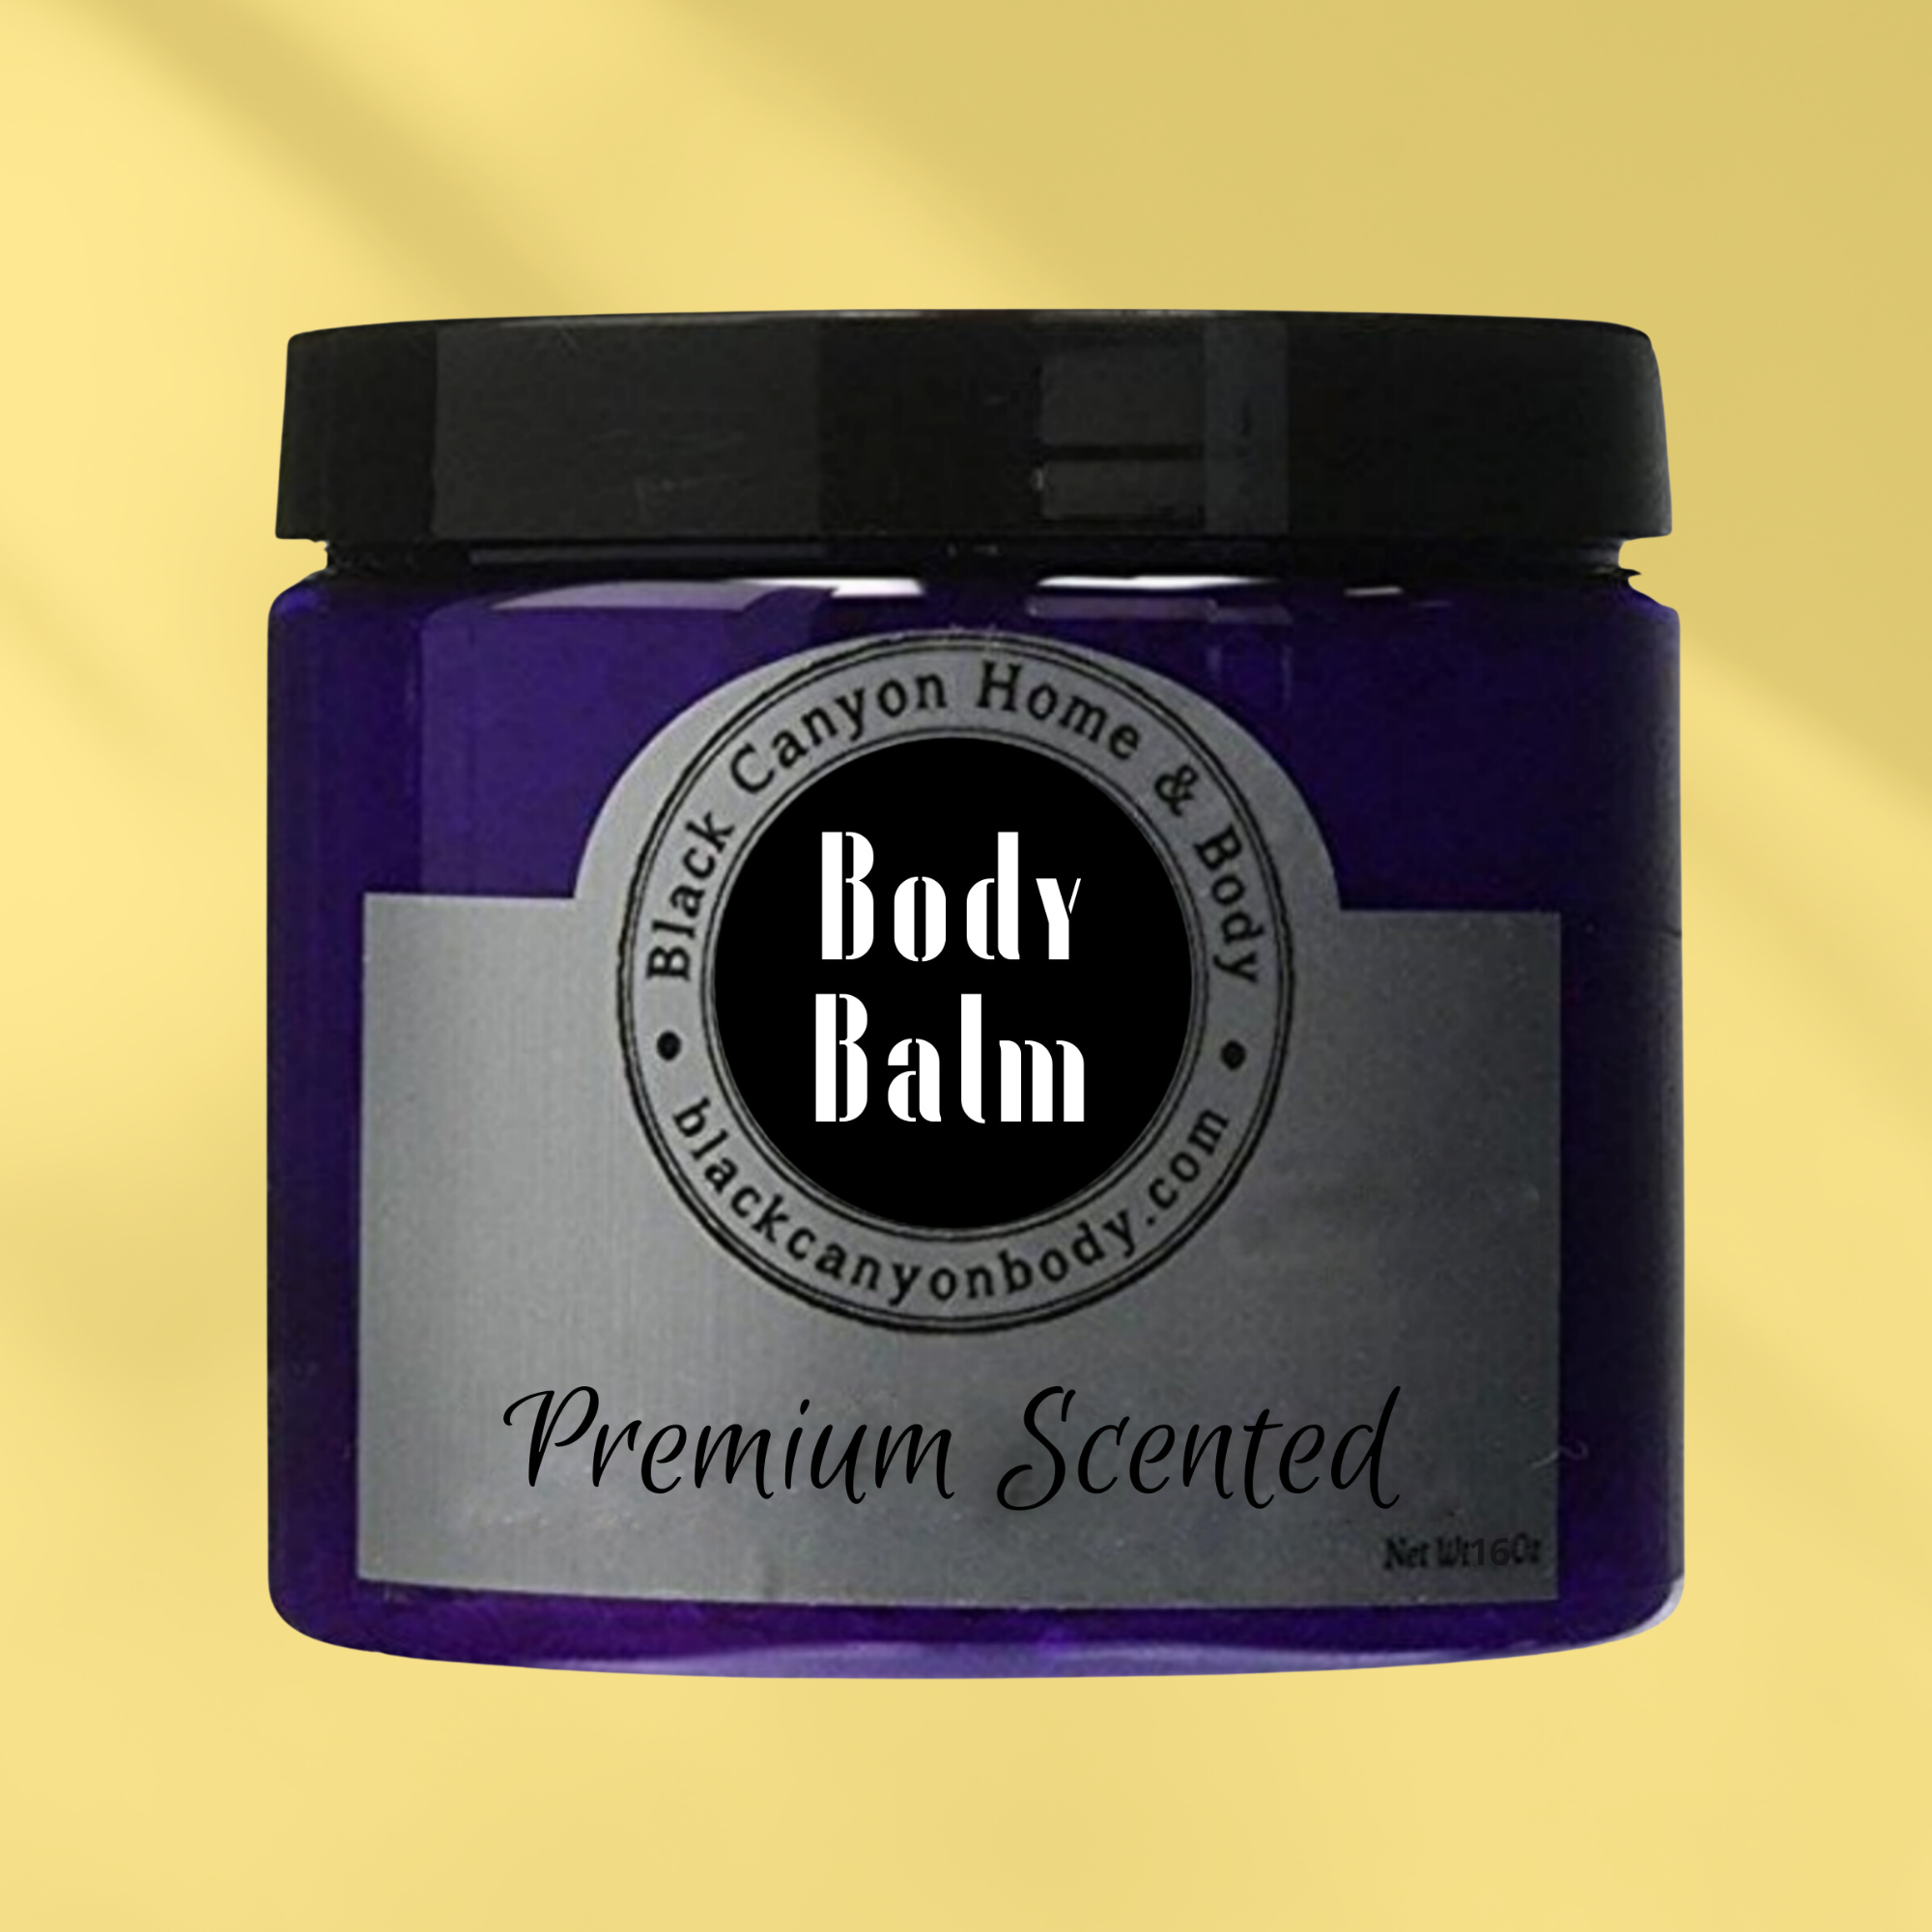 Black Canyon Raspberries & Cream Scented Natural Body Balm with Shea